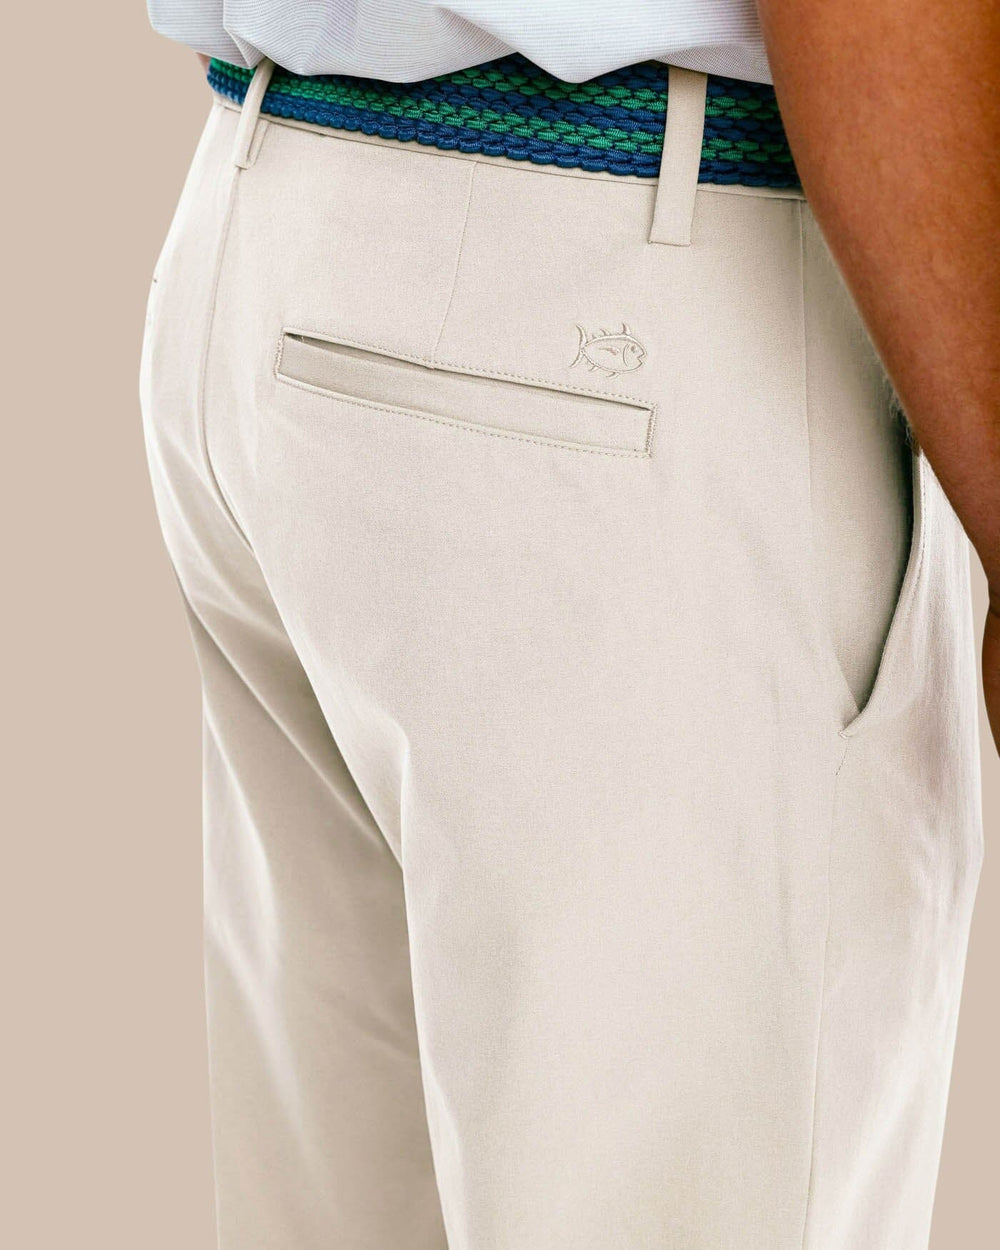 The pocket view of the Men's Jack Performance Pant by Southern Tide - Putty